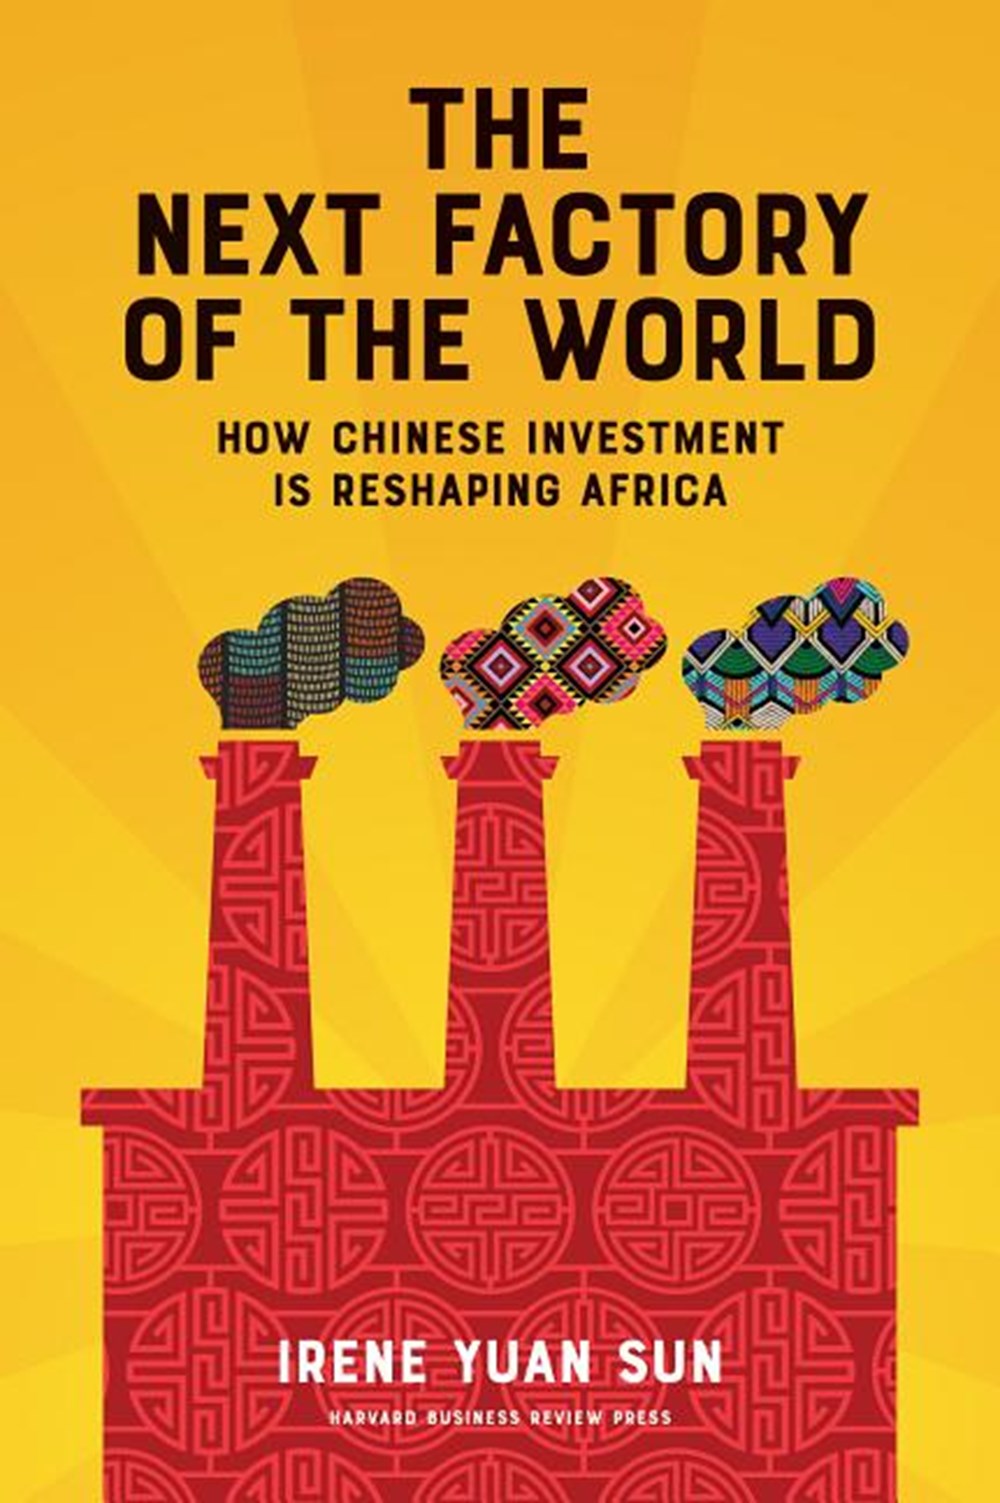 Next Factory of the World: How Chinese Investment Is Reshaping Africa